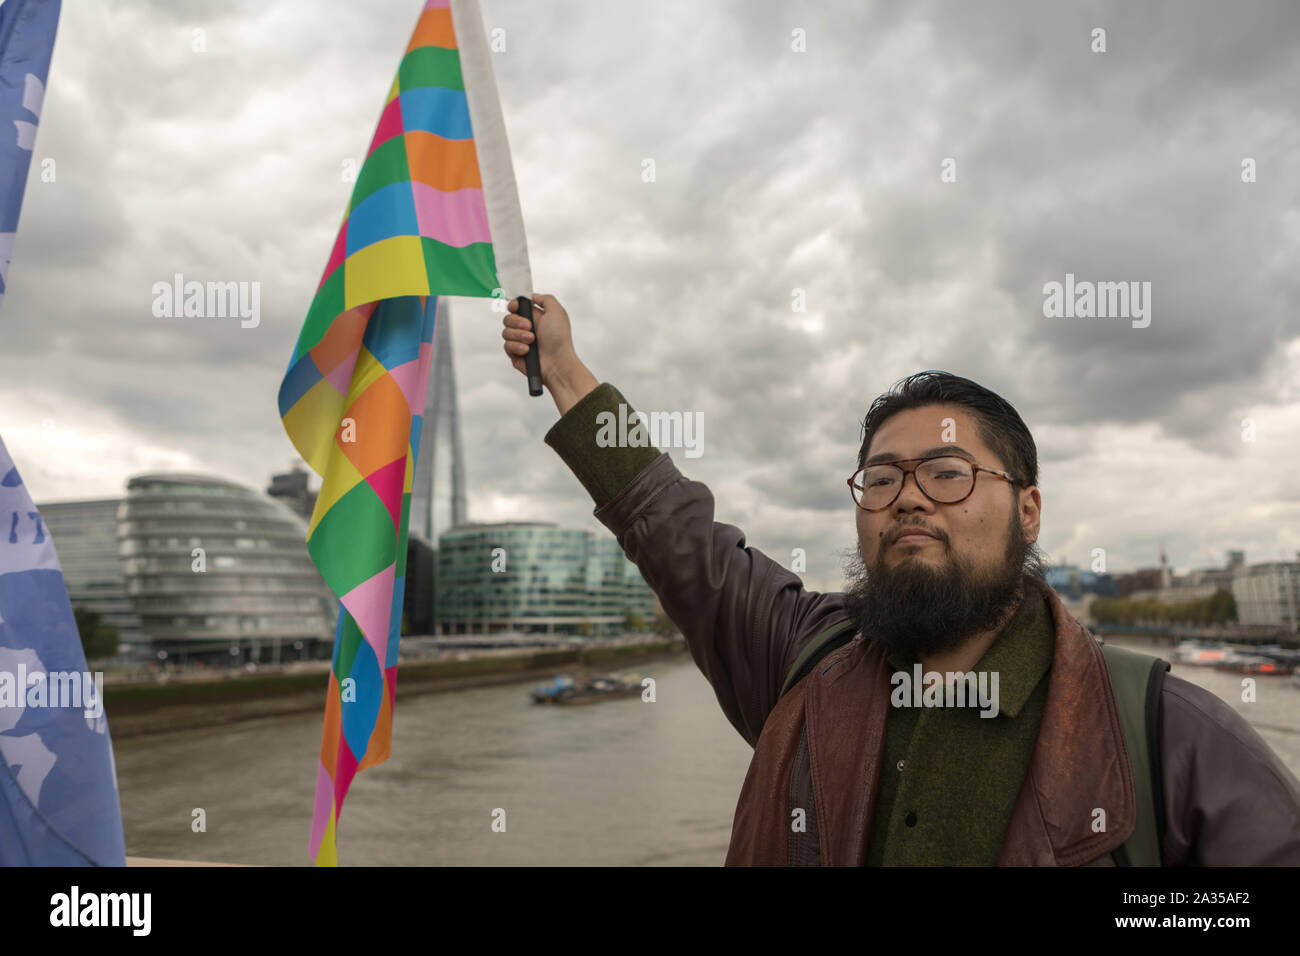 London, UK. 5th Oct, 2019. Chinese artist Badiucao with the Lennon Wall flag on Tower Bridge.  Chinese artist Badiucao and supporters join hands in a human chain, a showing of solidarity with protesters in Hong Kong. The Lennon Wall flag, symbolising Hong Kongs fight for freedom is also symbolically raised. Penelope Barritt/Alamy Live News Stock Photo